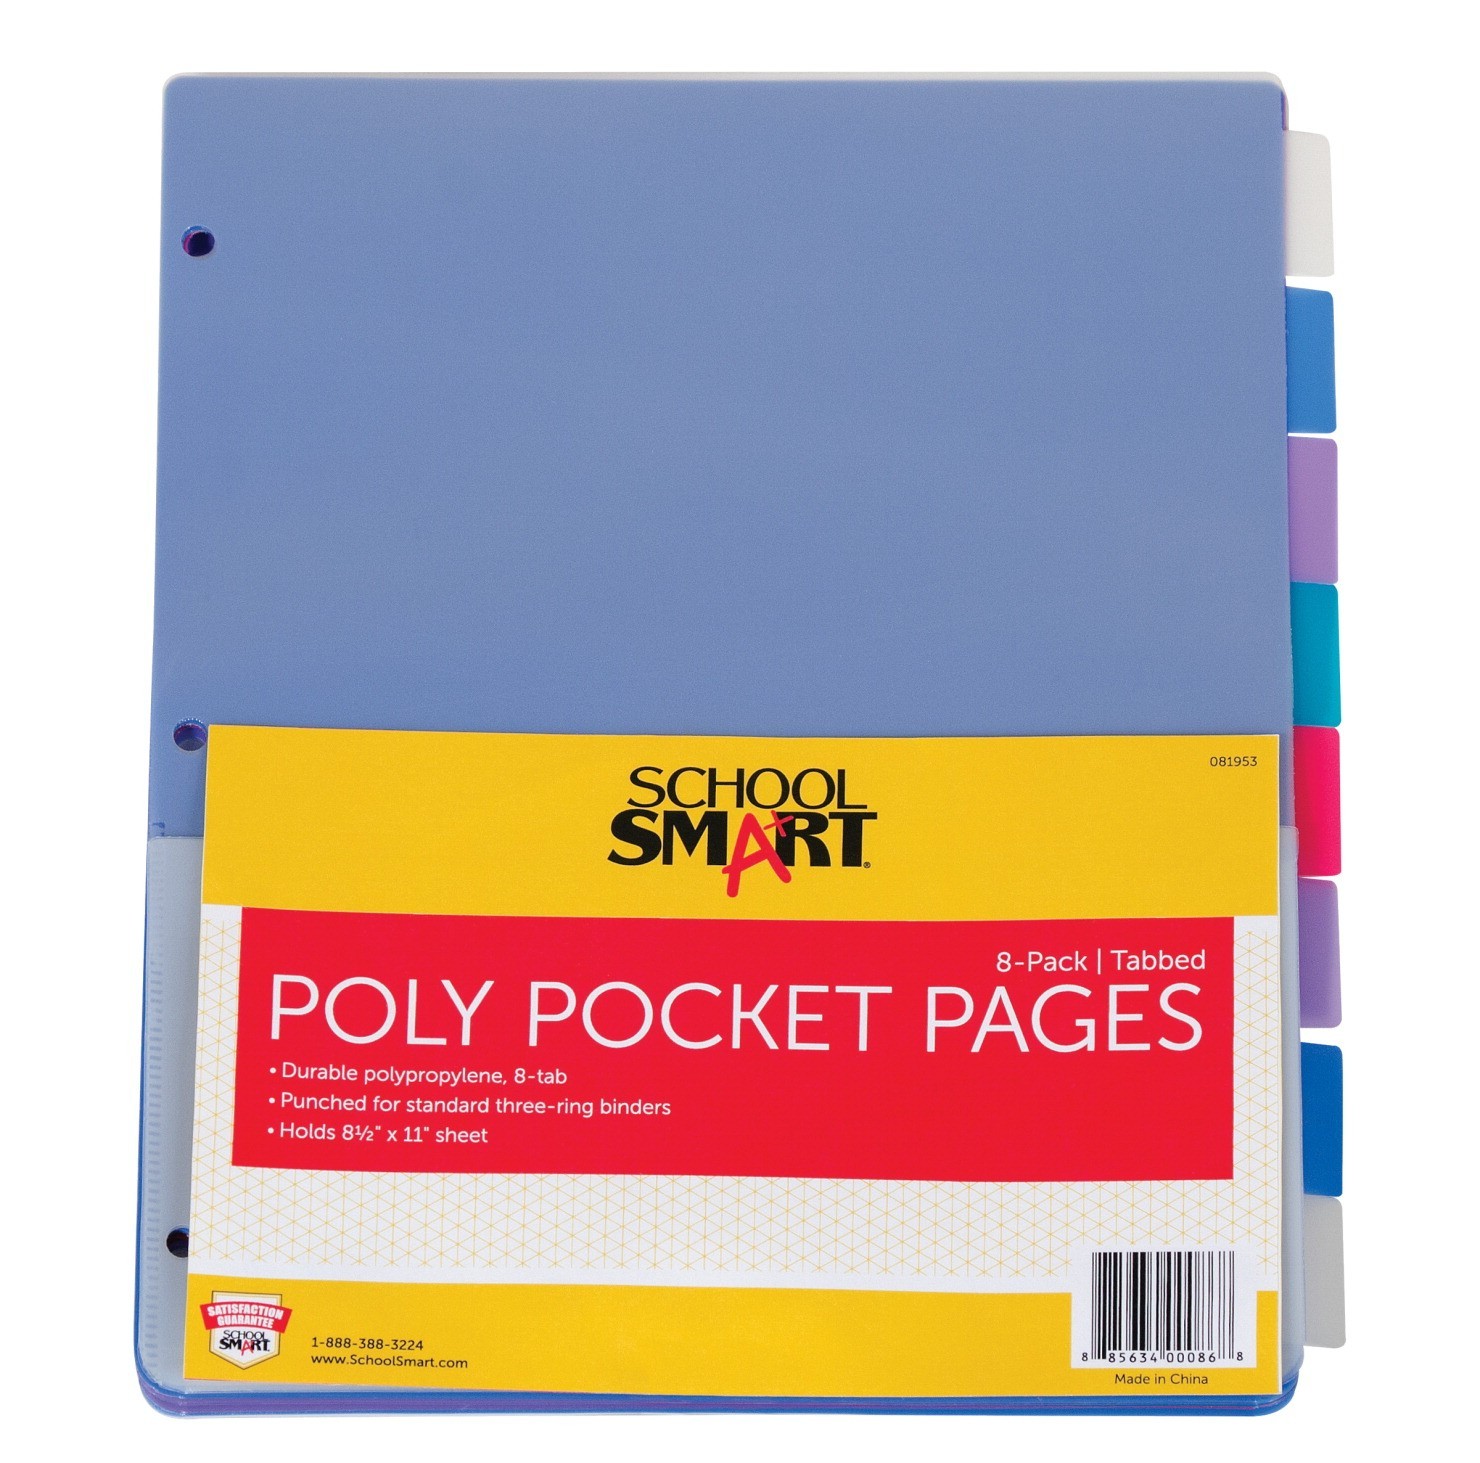 11 X 8-1/2 Polypropylene 2-Pocket Pages with Tabs, Assorted Colors - 8/Pkg